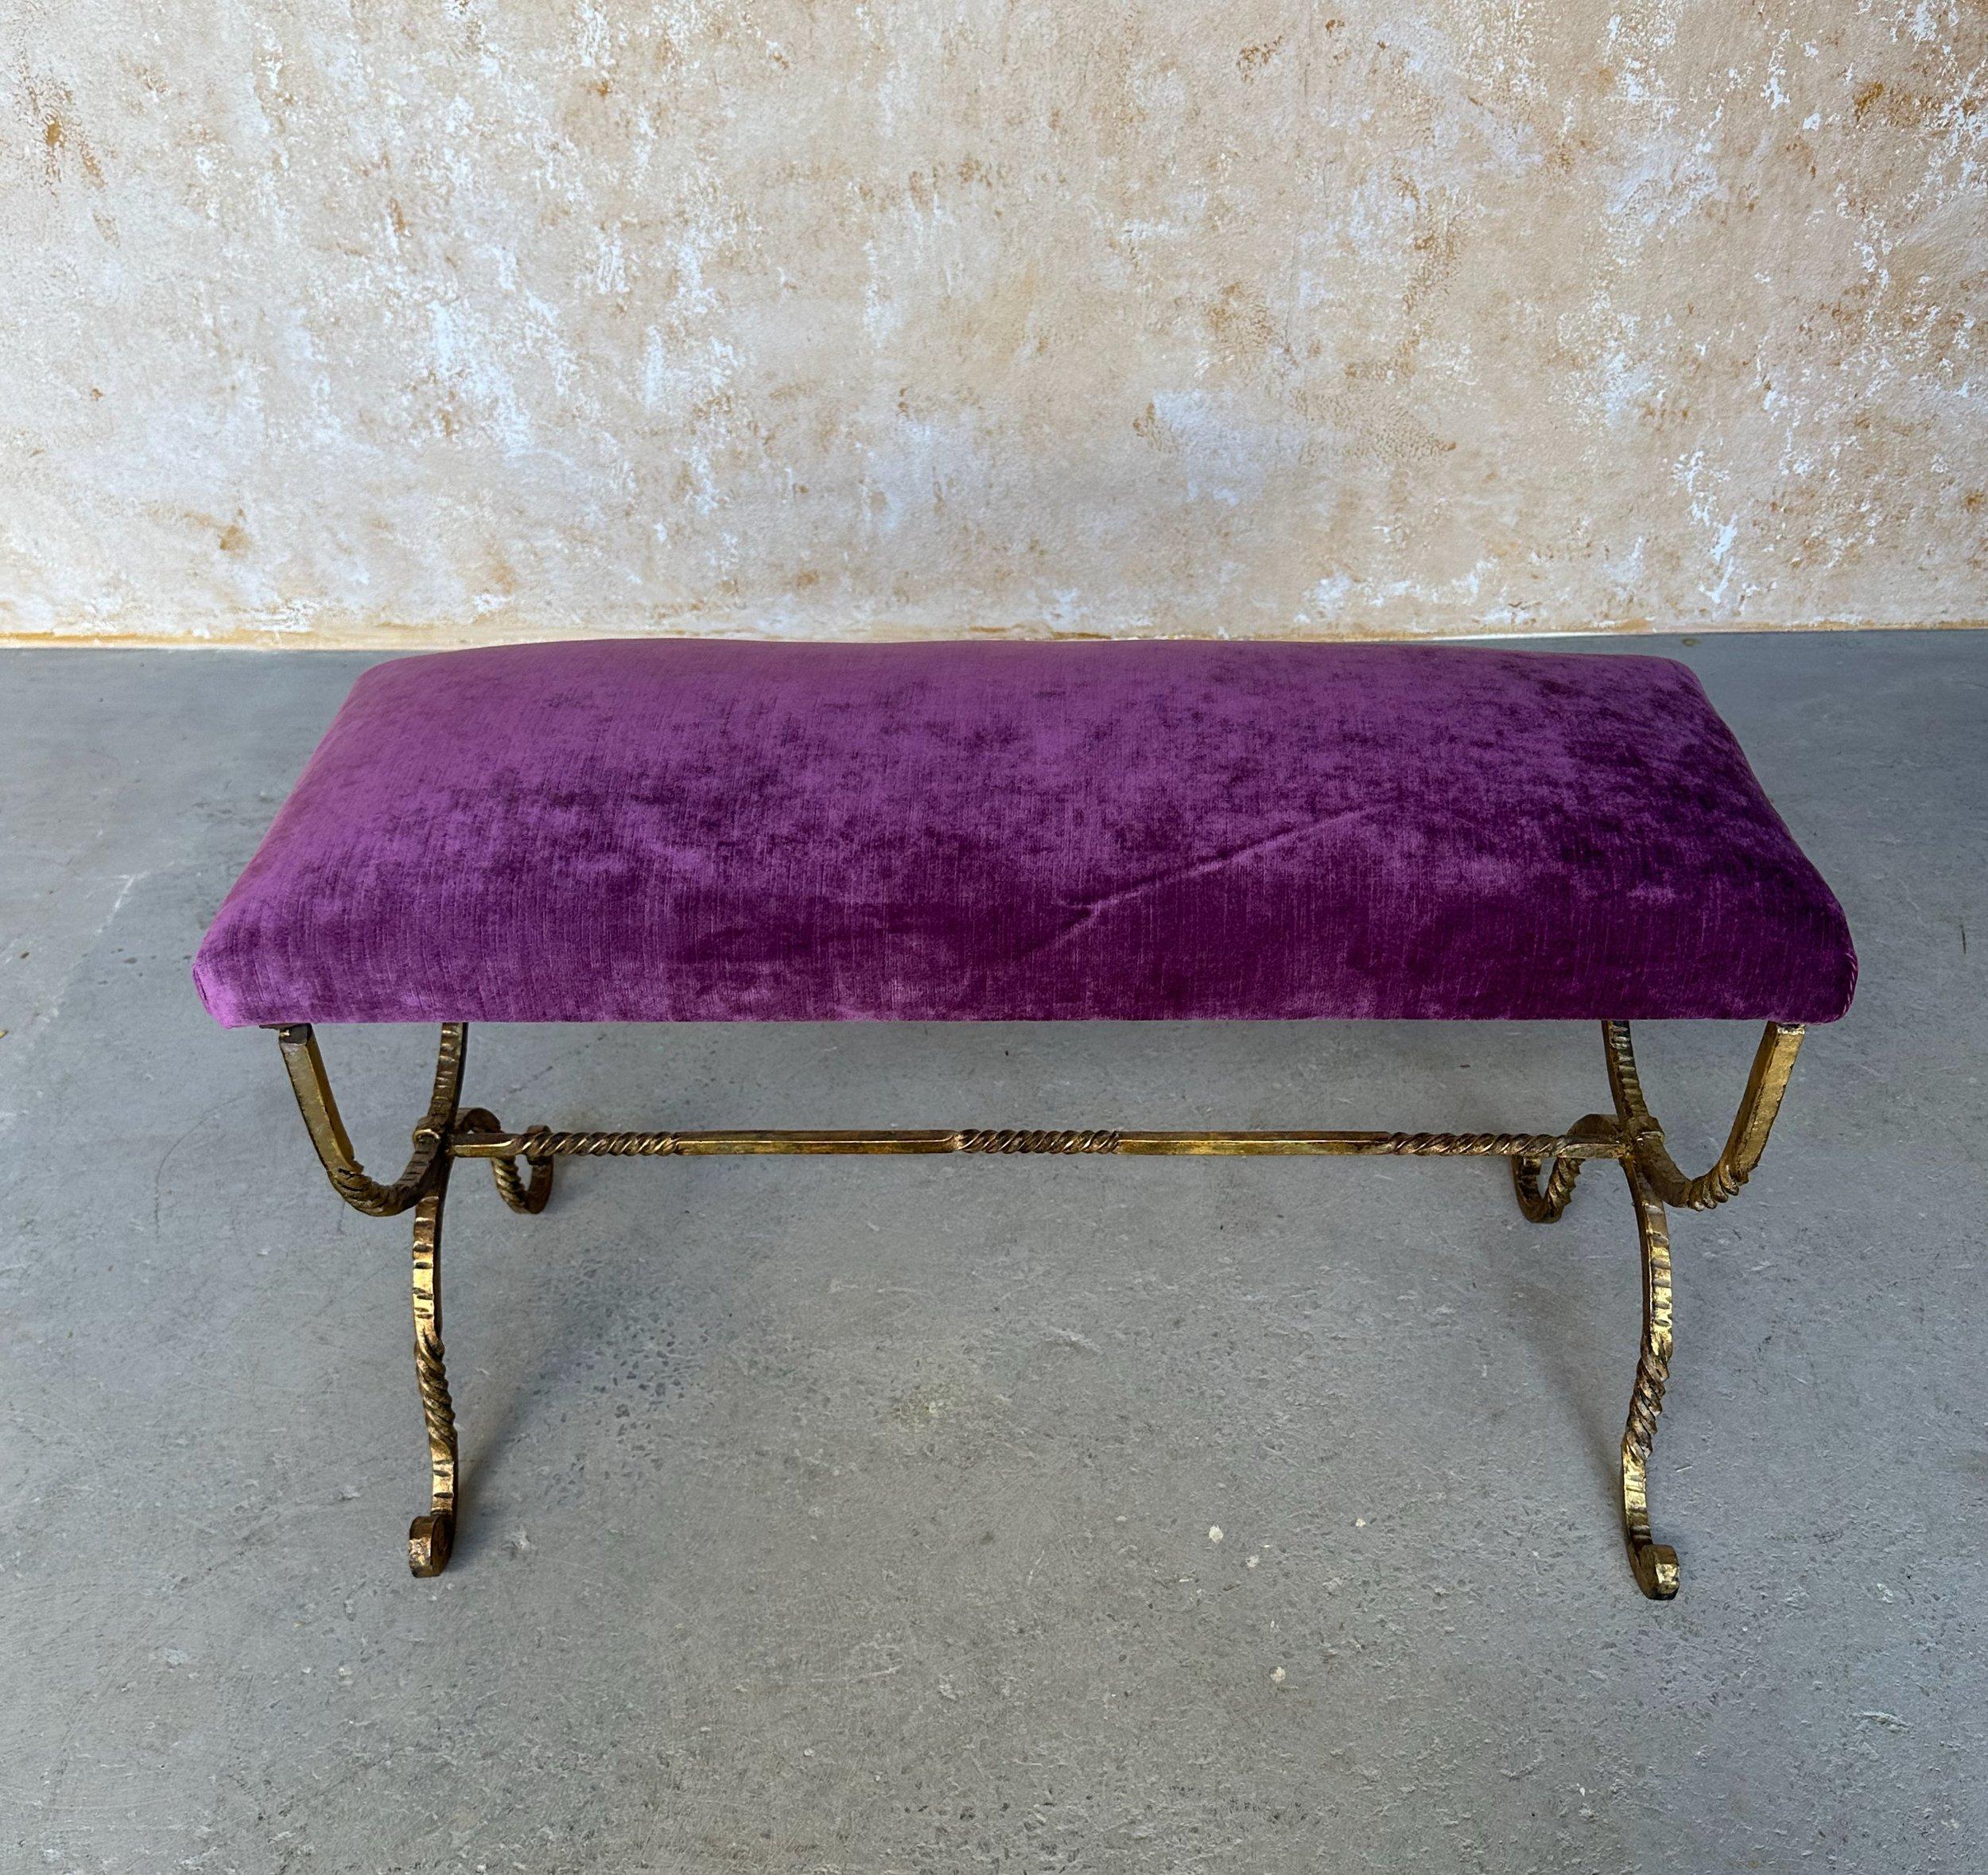 Vintage Spanish Gilt Iron Bench with Ornate Twisted Frame For Sale 5